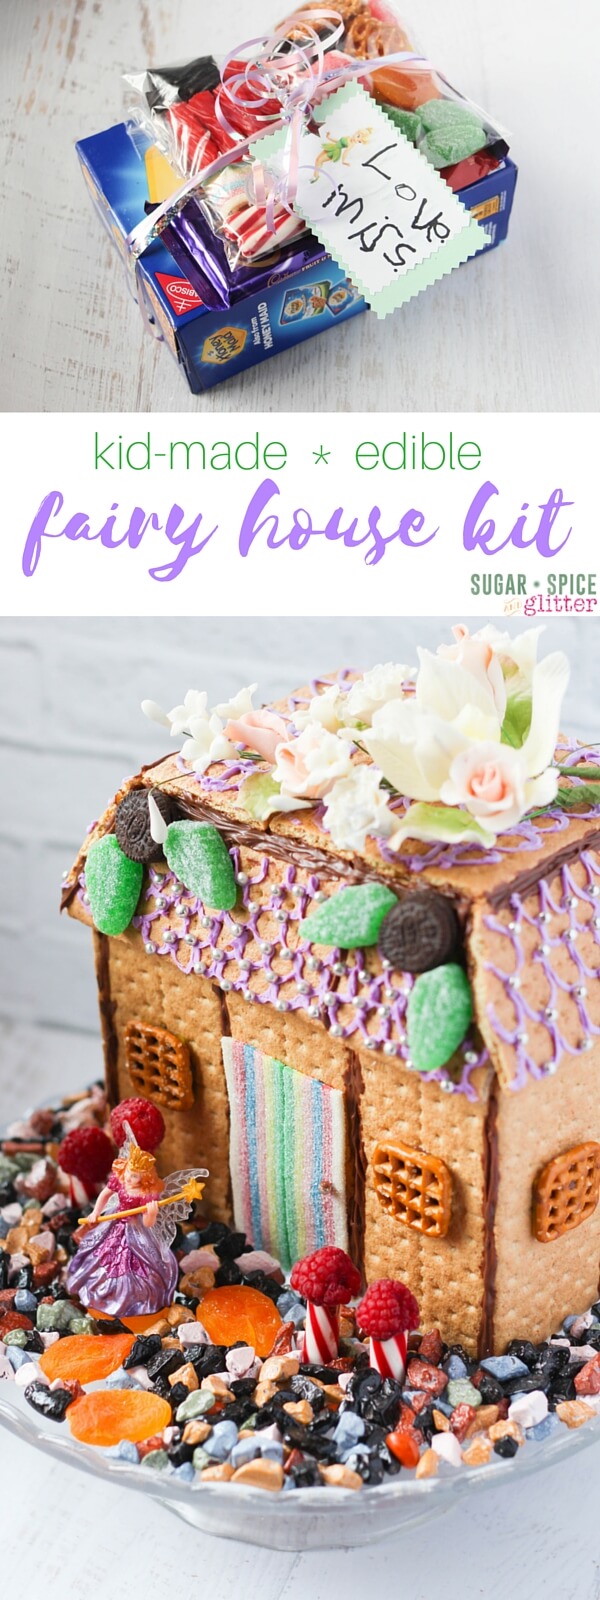 How to make an edible fairy house tutorial, complete with a free printable gift tag for a DIY Fairy House Kit. This would be a beautiful centrepiece at a Fairy party and is a great STEAM activity for kids, allowing them to engineer a house with all edible materials